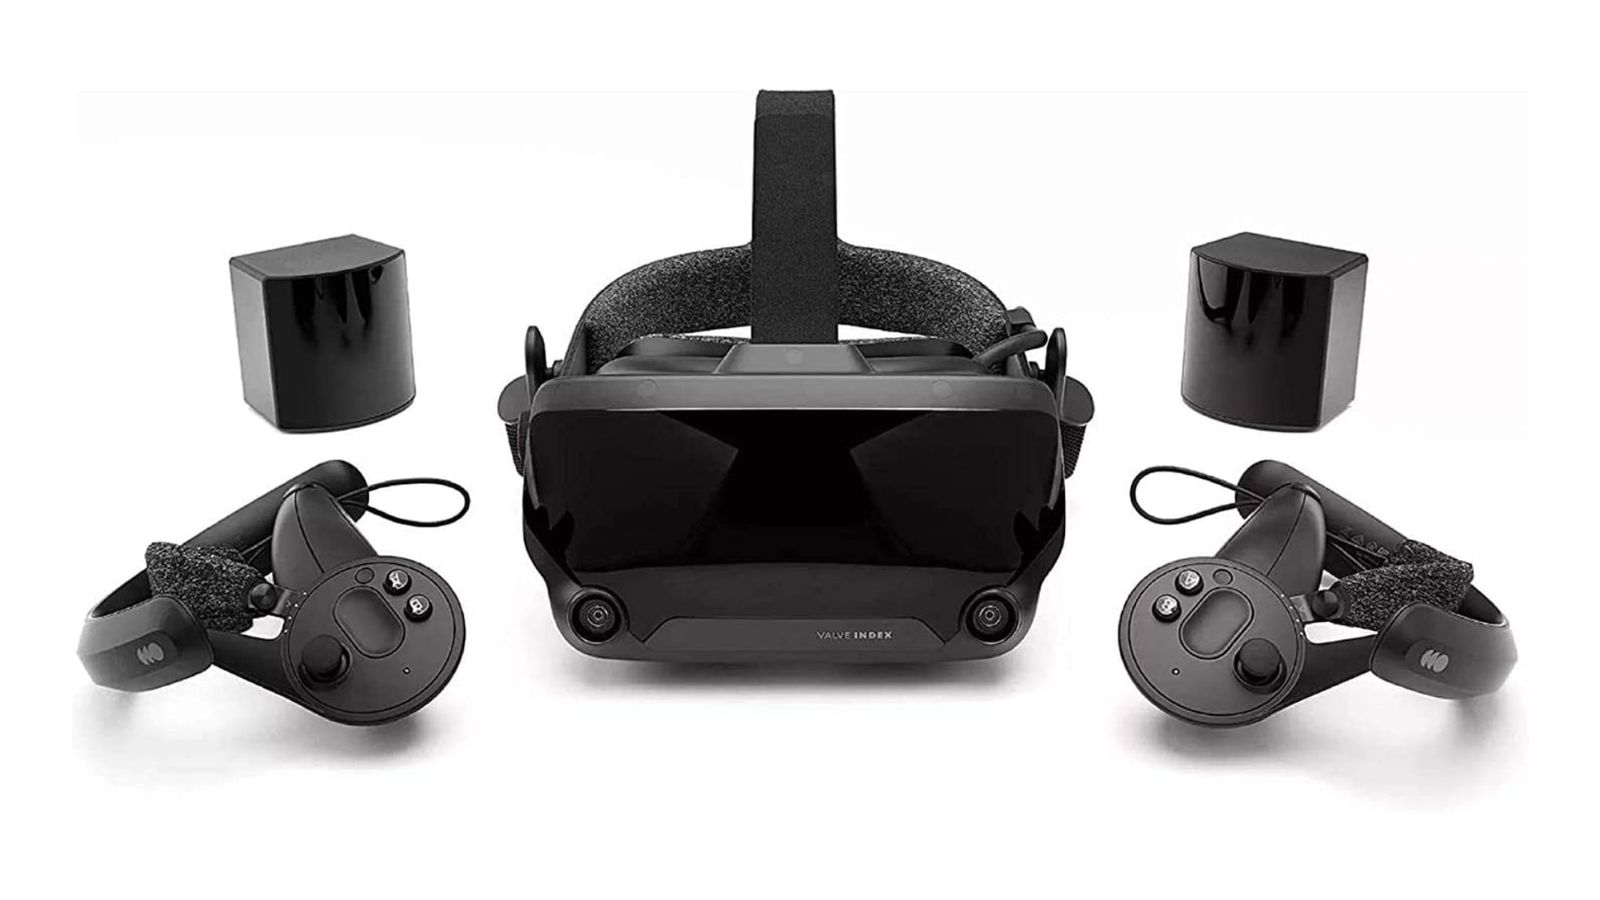 Valve Index product image of a black VR headset next to a set of controllers and sensors.